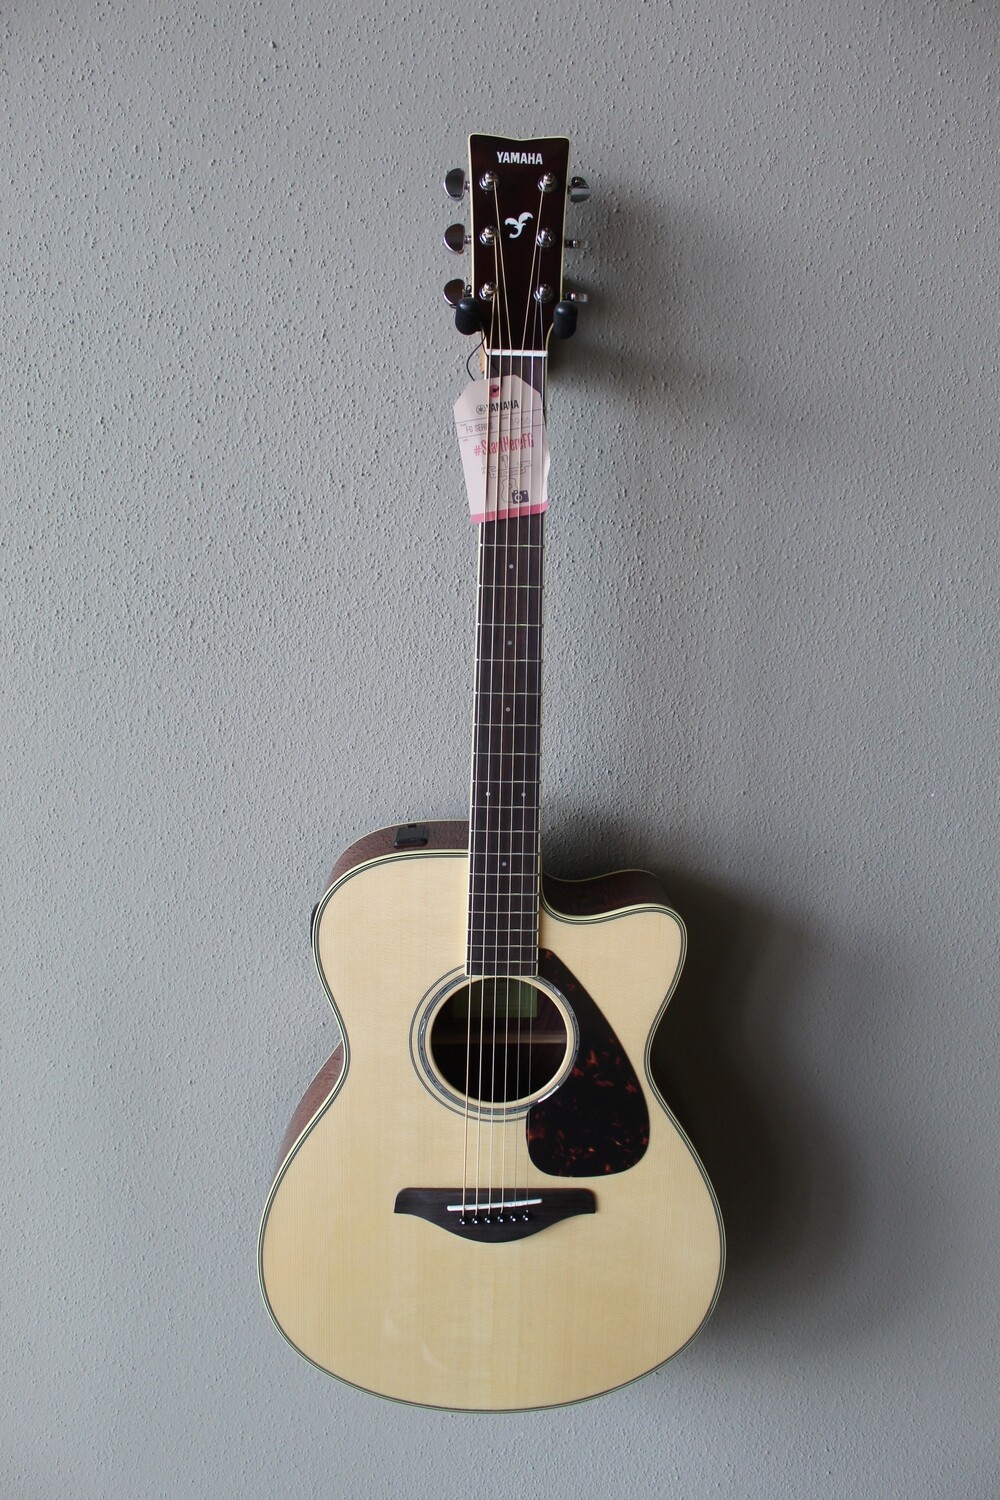 Yamaha FSX830C Steel String Acoustic/Electric Guitar